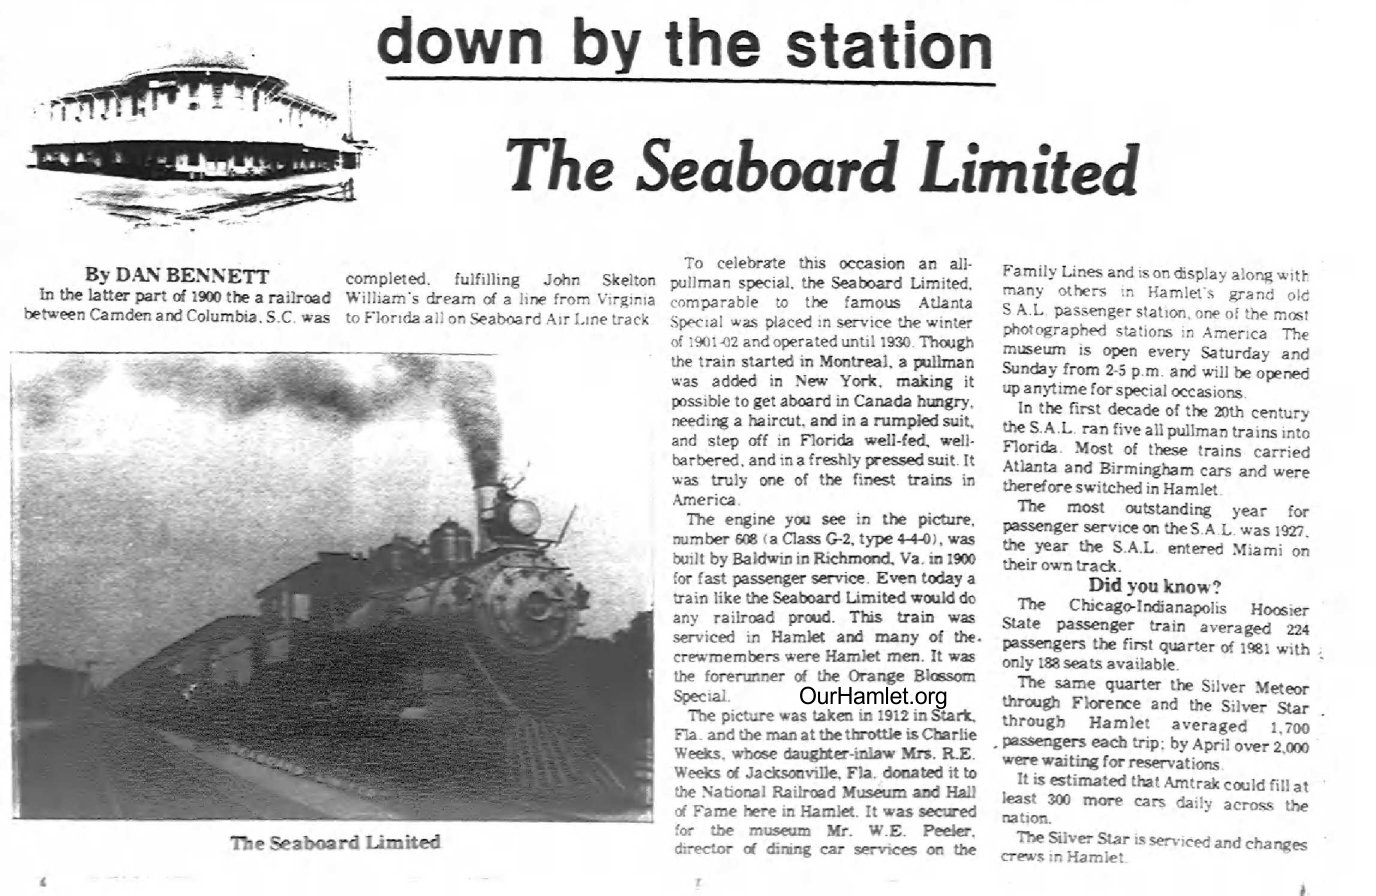 Down by the Station - The Seaboard Limited OH.jpg